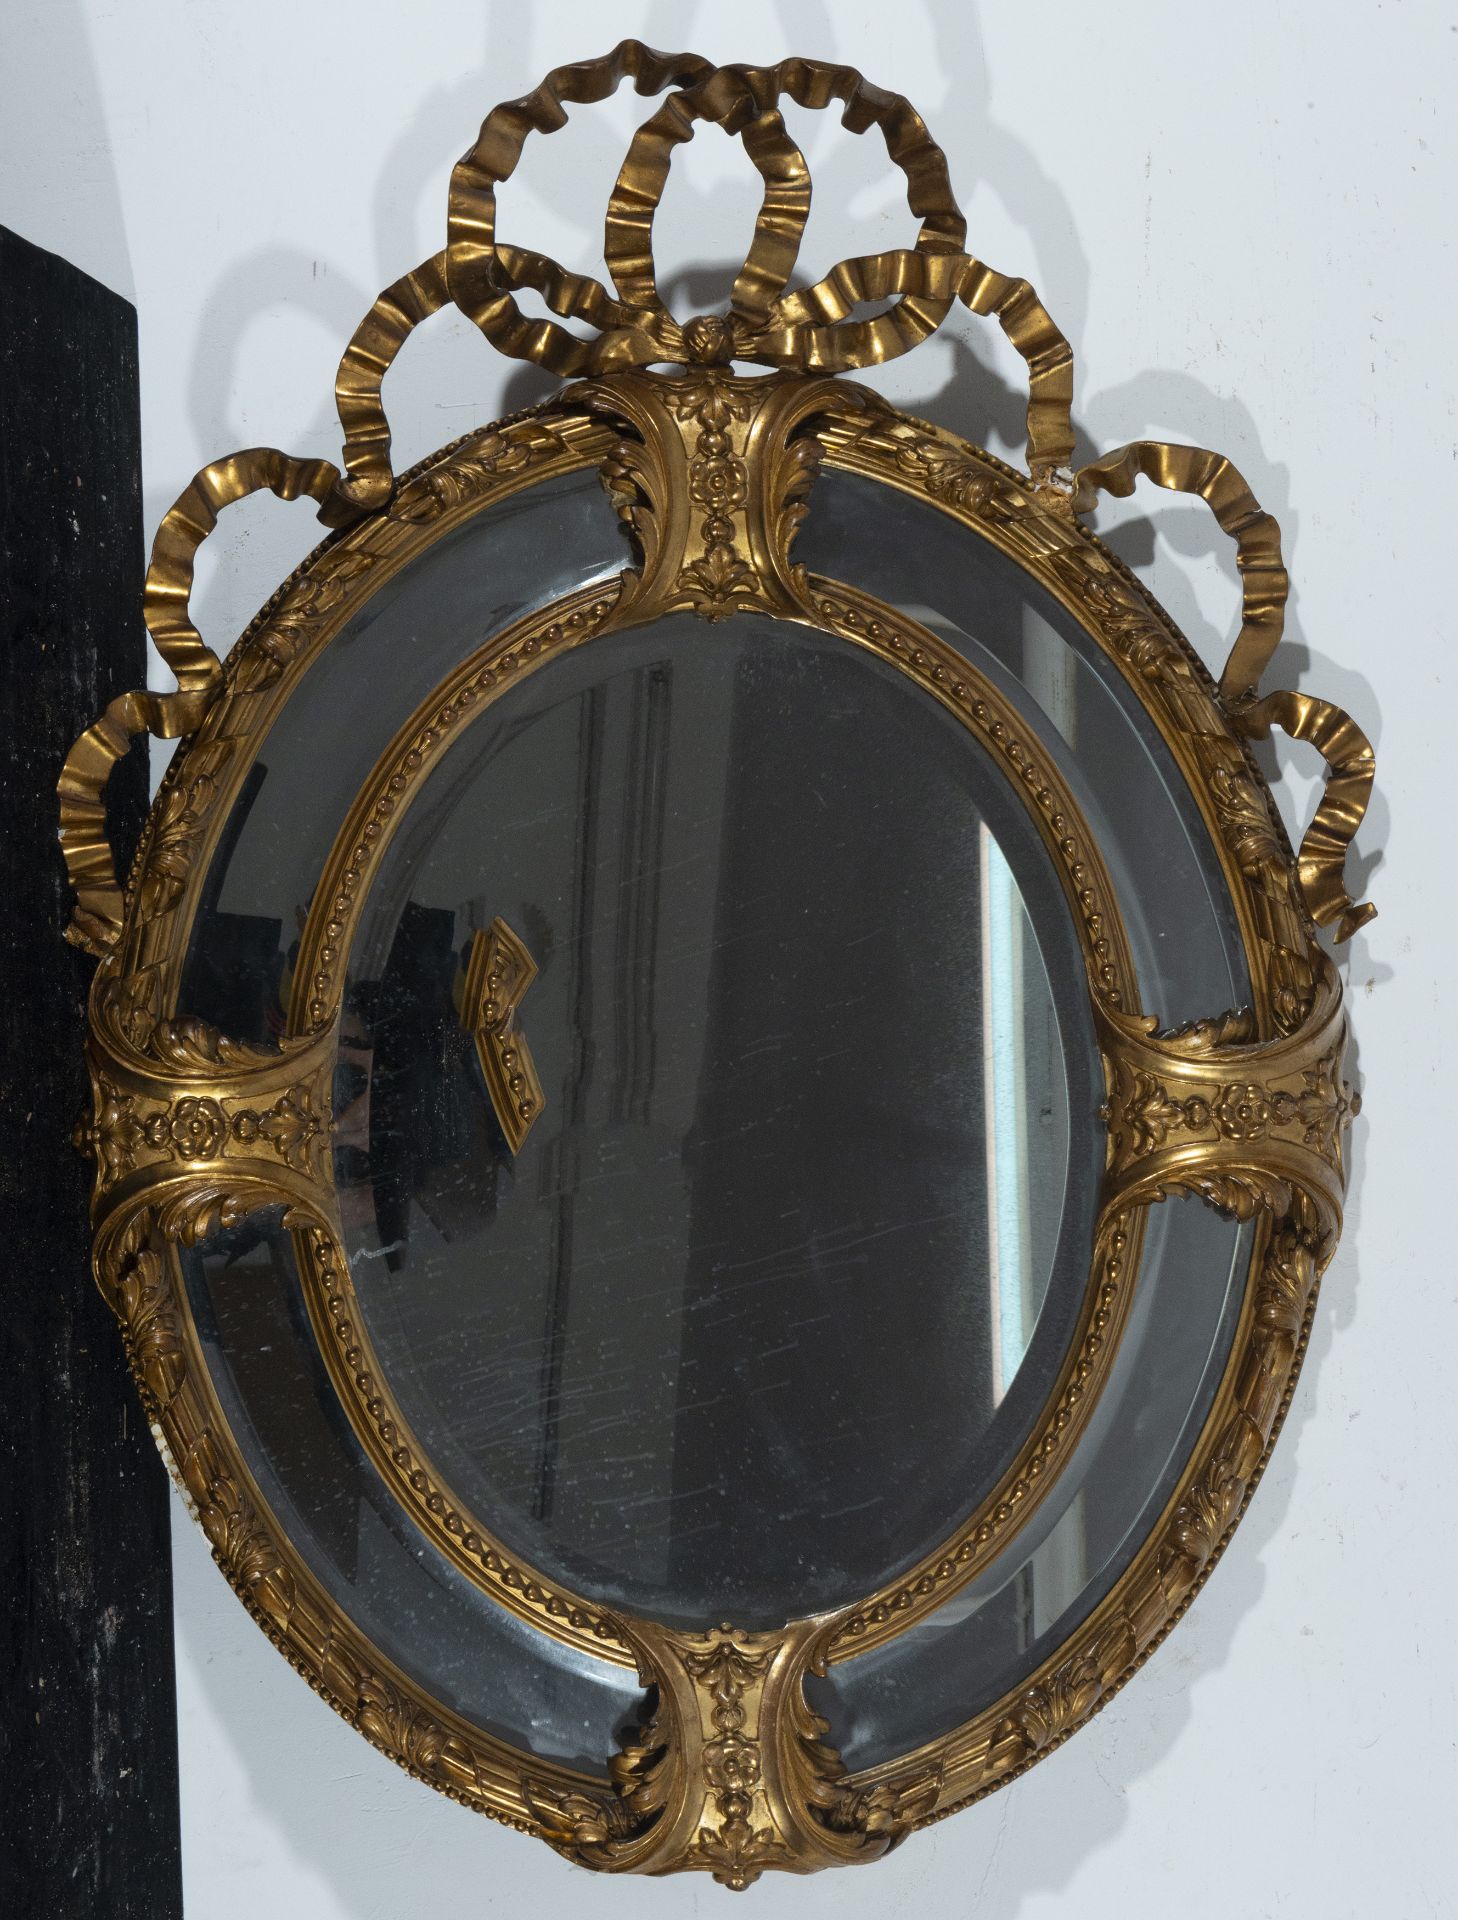 Decorative oval mirror from the 19th century